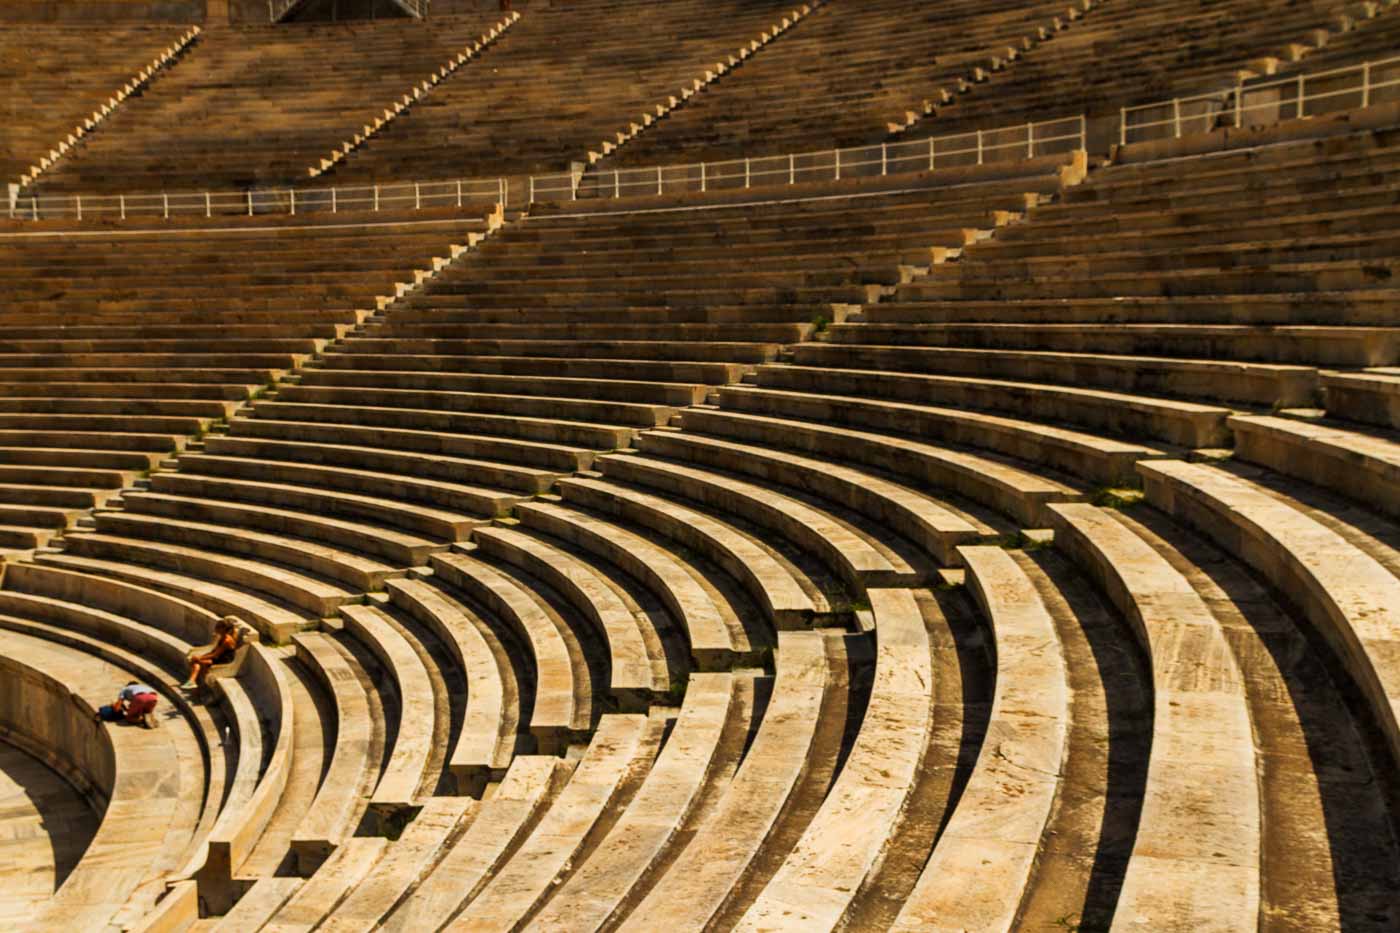 If you are an architecture or a sports fan, take advantage of the Panathenaic Stadium, where the first modern Olympic Games took place. This is the place to run around the track while you imagine the crowd's roar and feel the goosebumps rise. 